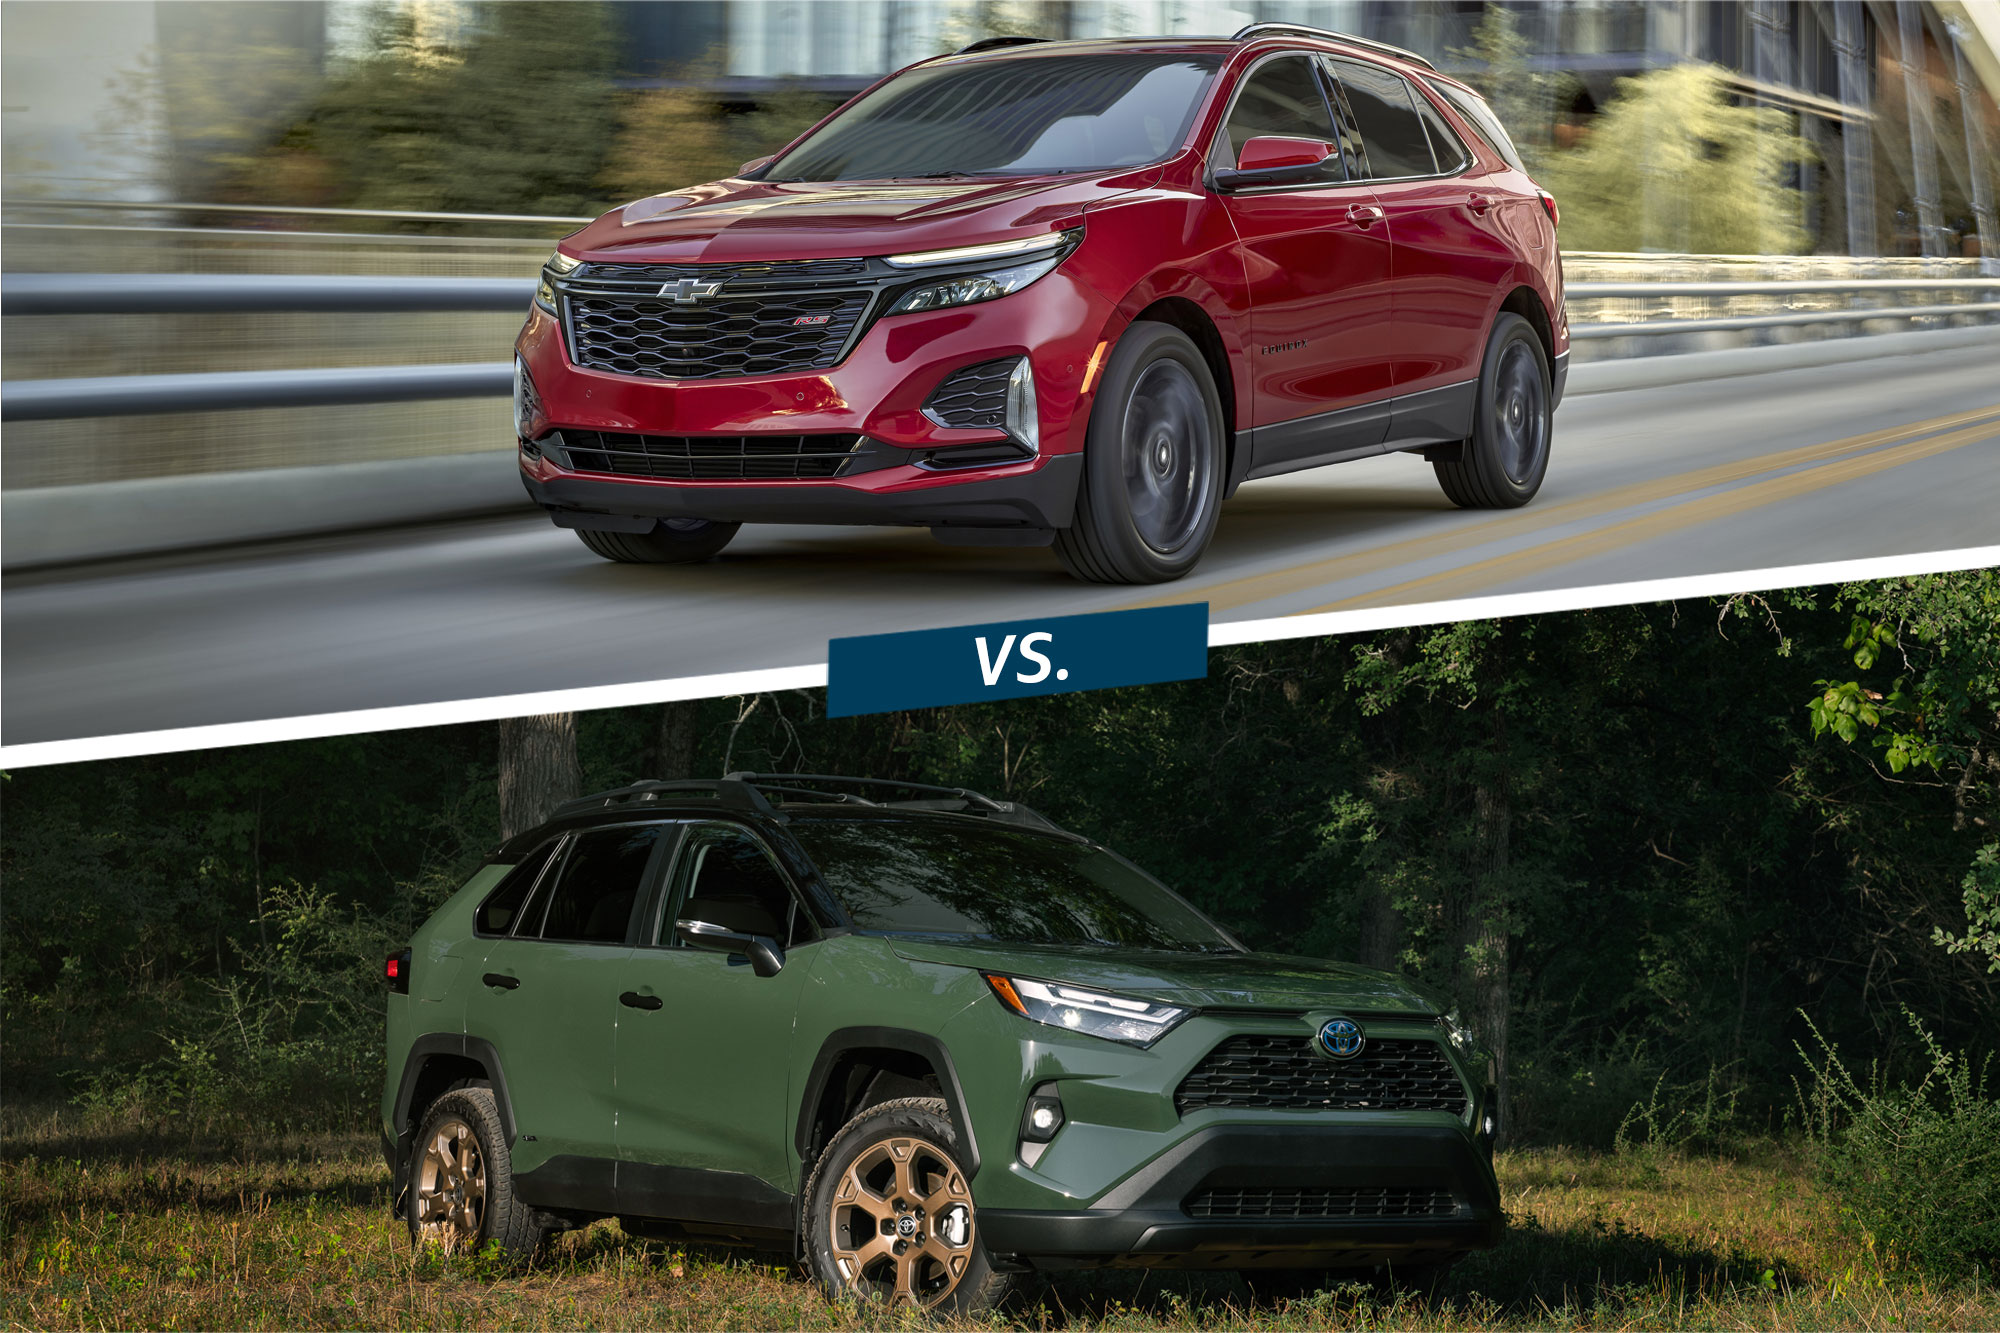 Red Chevrolet Equinox on top of split image with green ToyotaRAV4 on bottom.